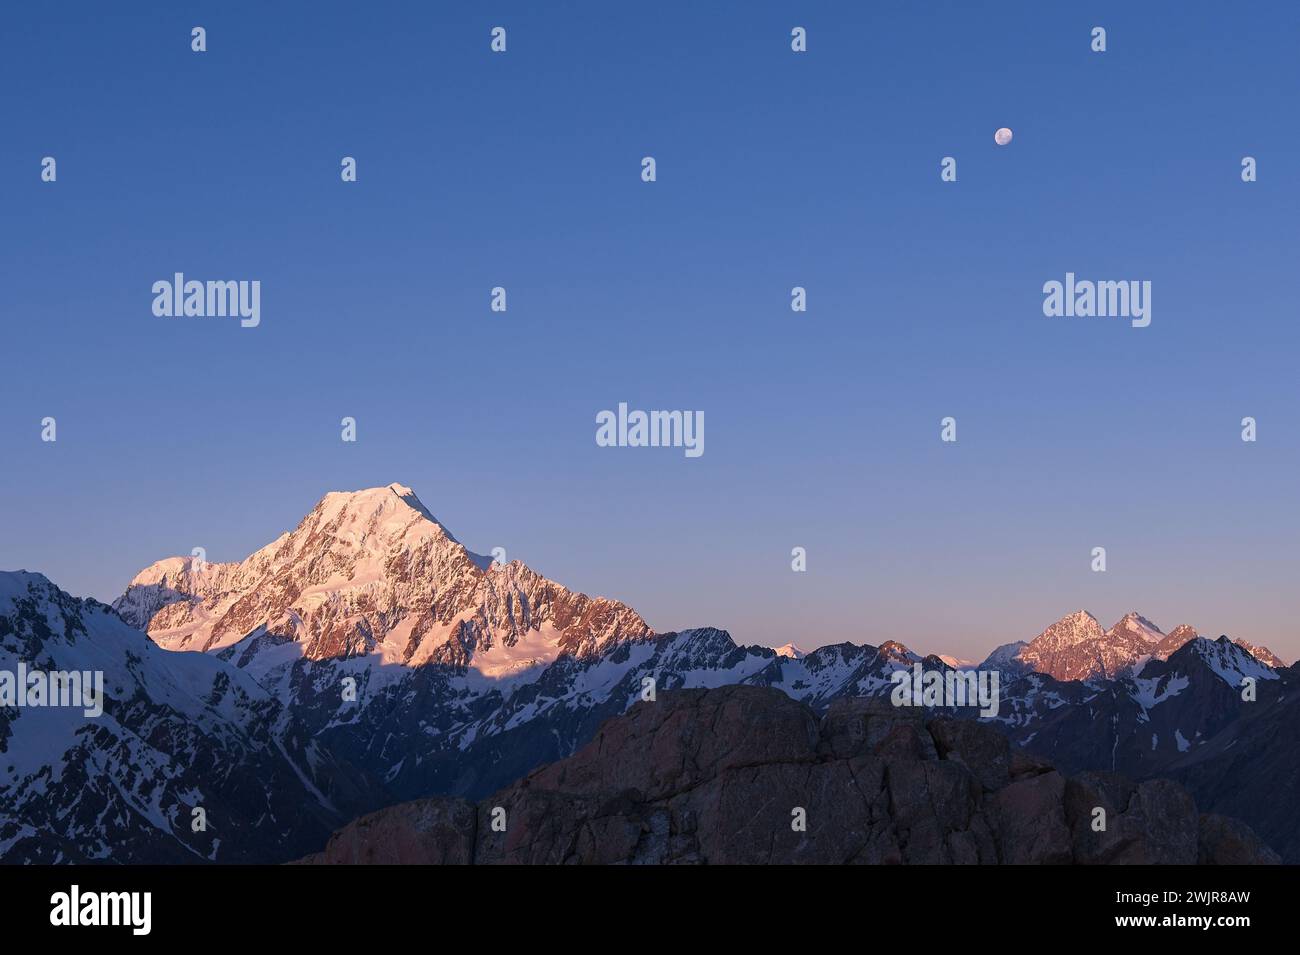 Scenic Sunrise at Mount Cook: Snowy Mountain Peaks Glowing in Golden Light, Accompanied by the Moon in New Zealand's Breathtaking Landscape Stock Photo